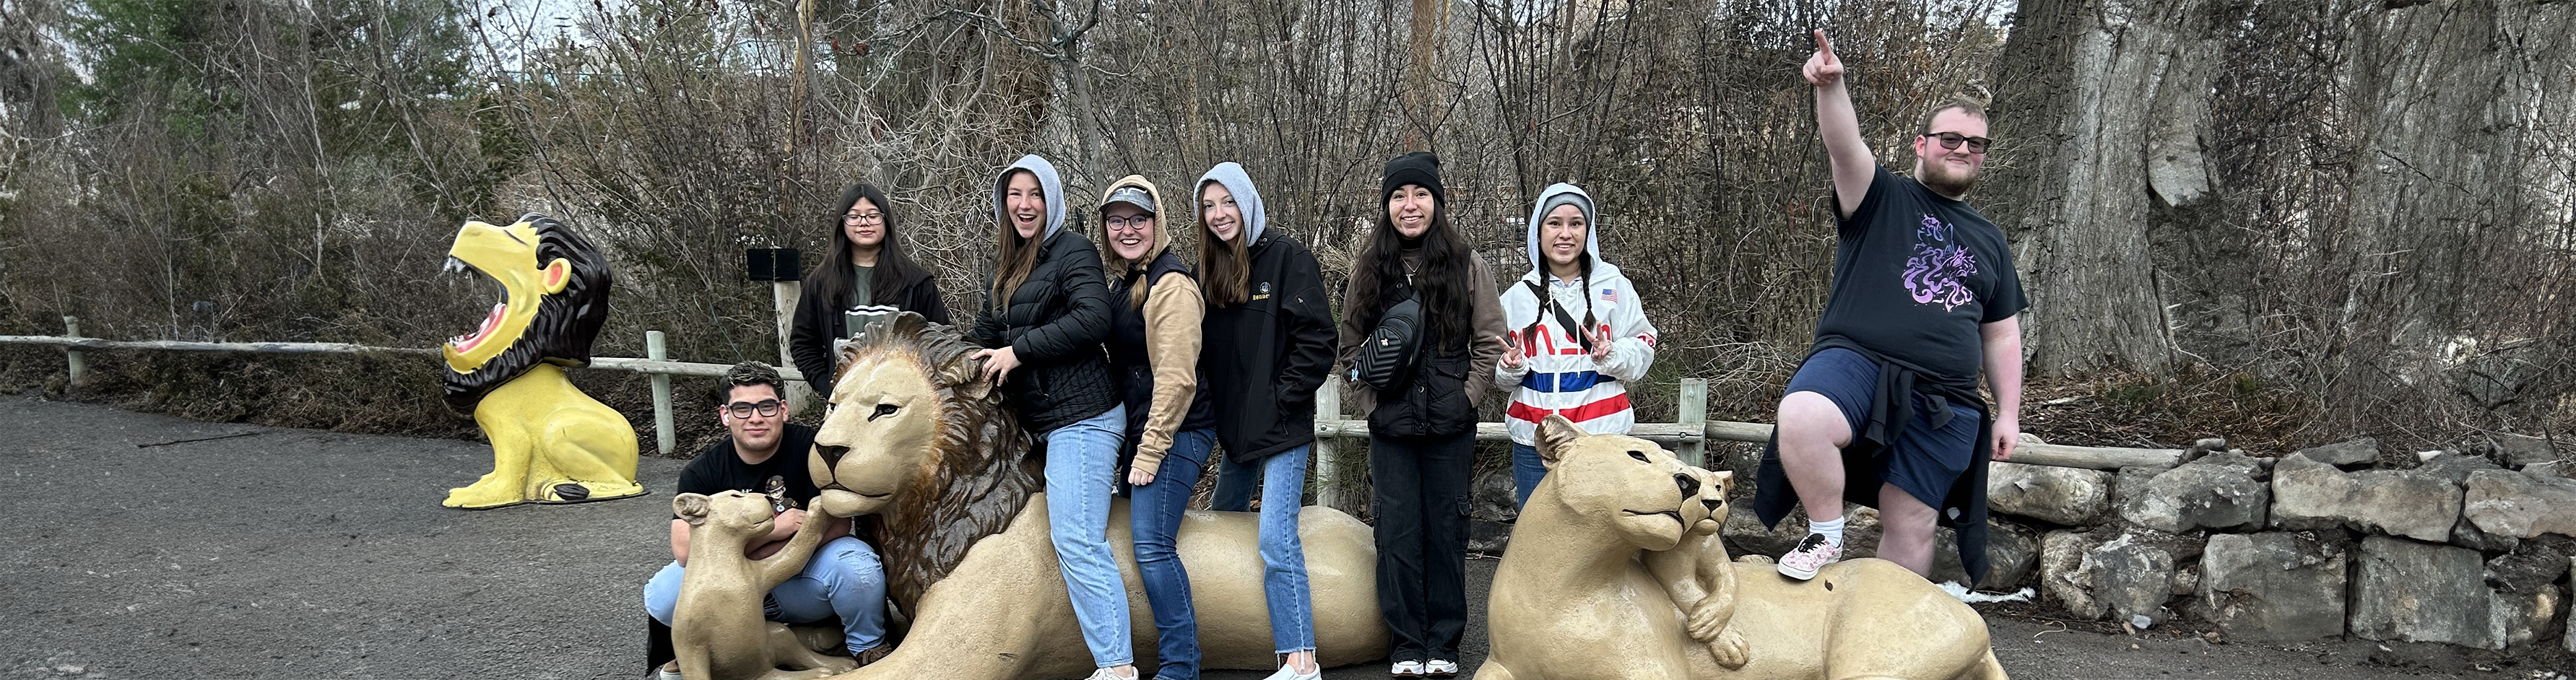 A group of Students on a field Trip to the zoo for Vetrinary Assisting.